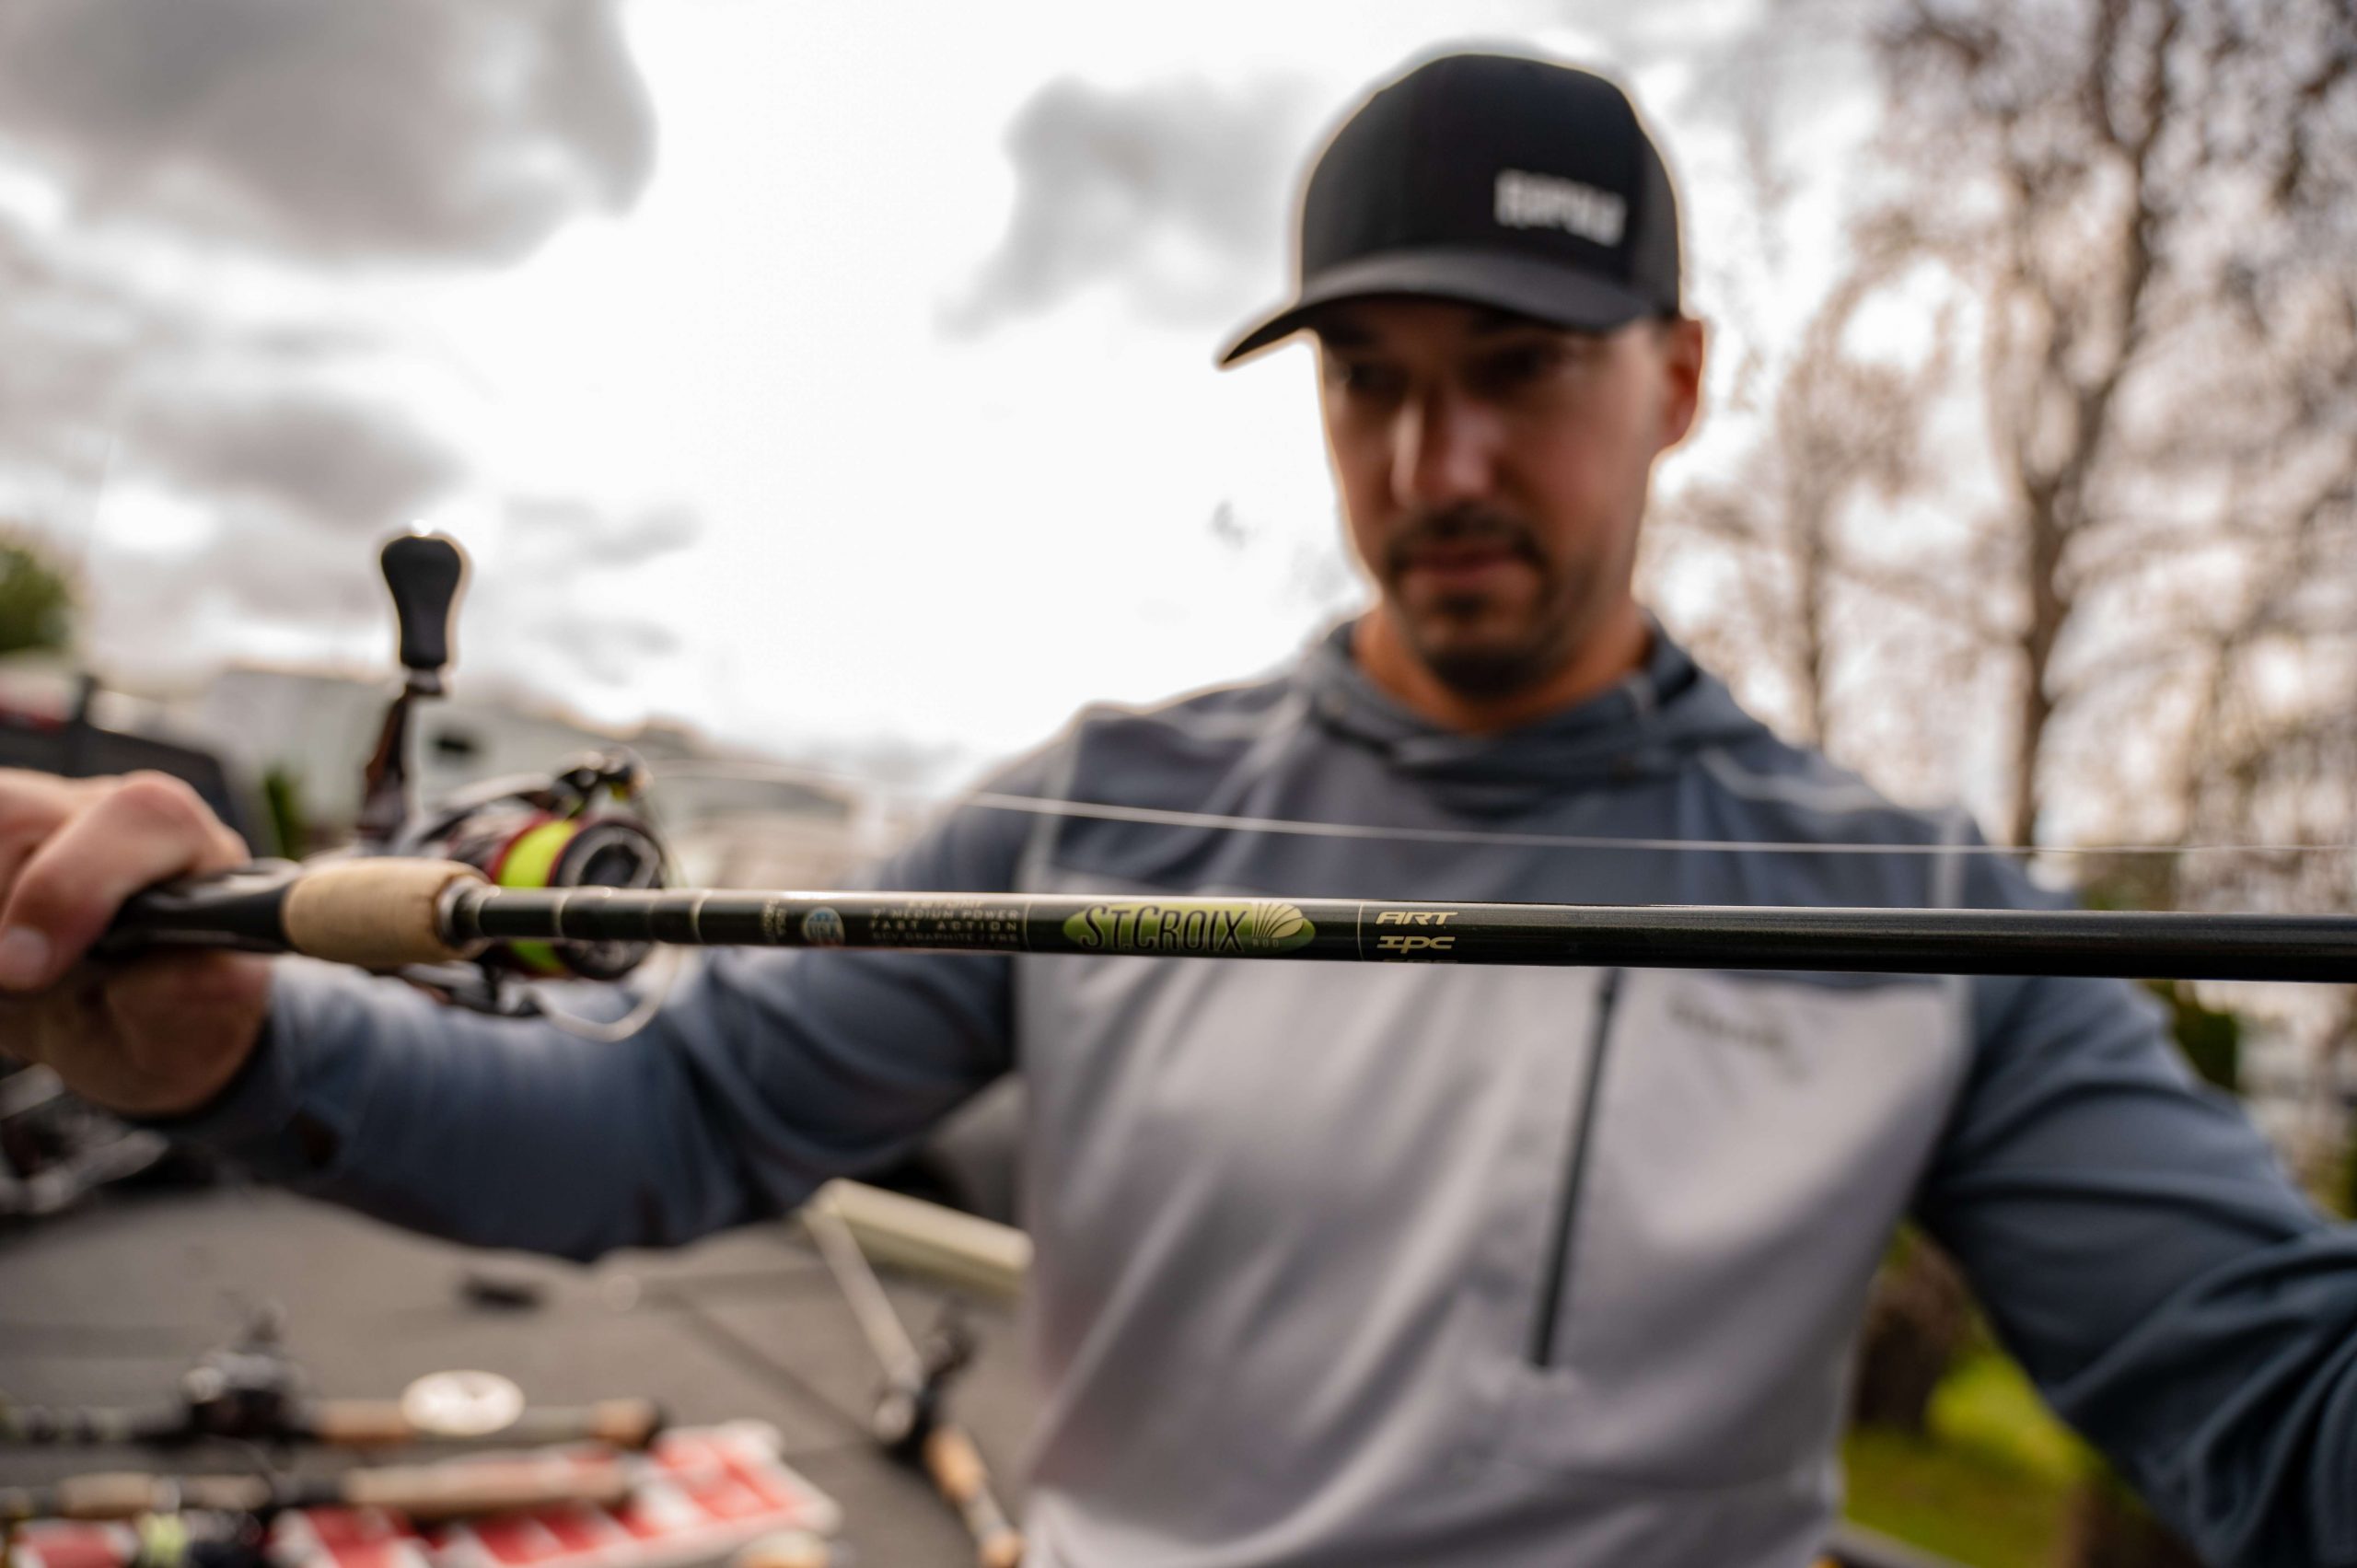 For the swimbait, a St. Croix 7-foot Legend Elite medium action rod gets the job done.